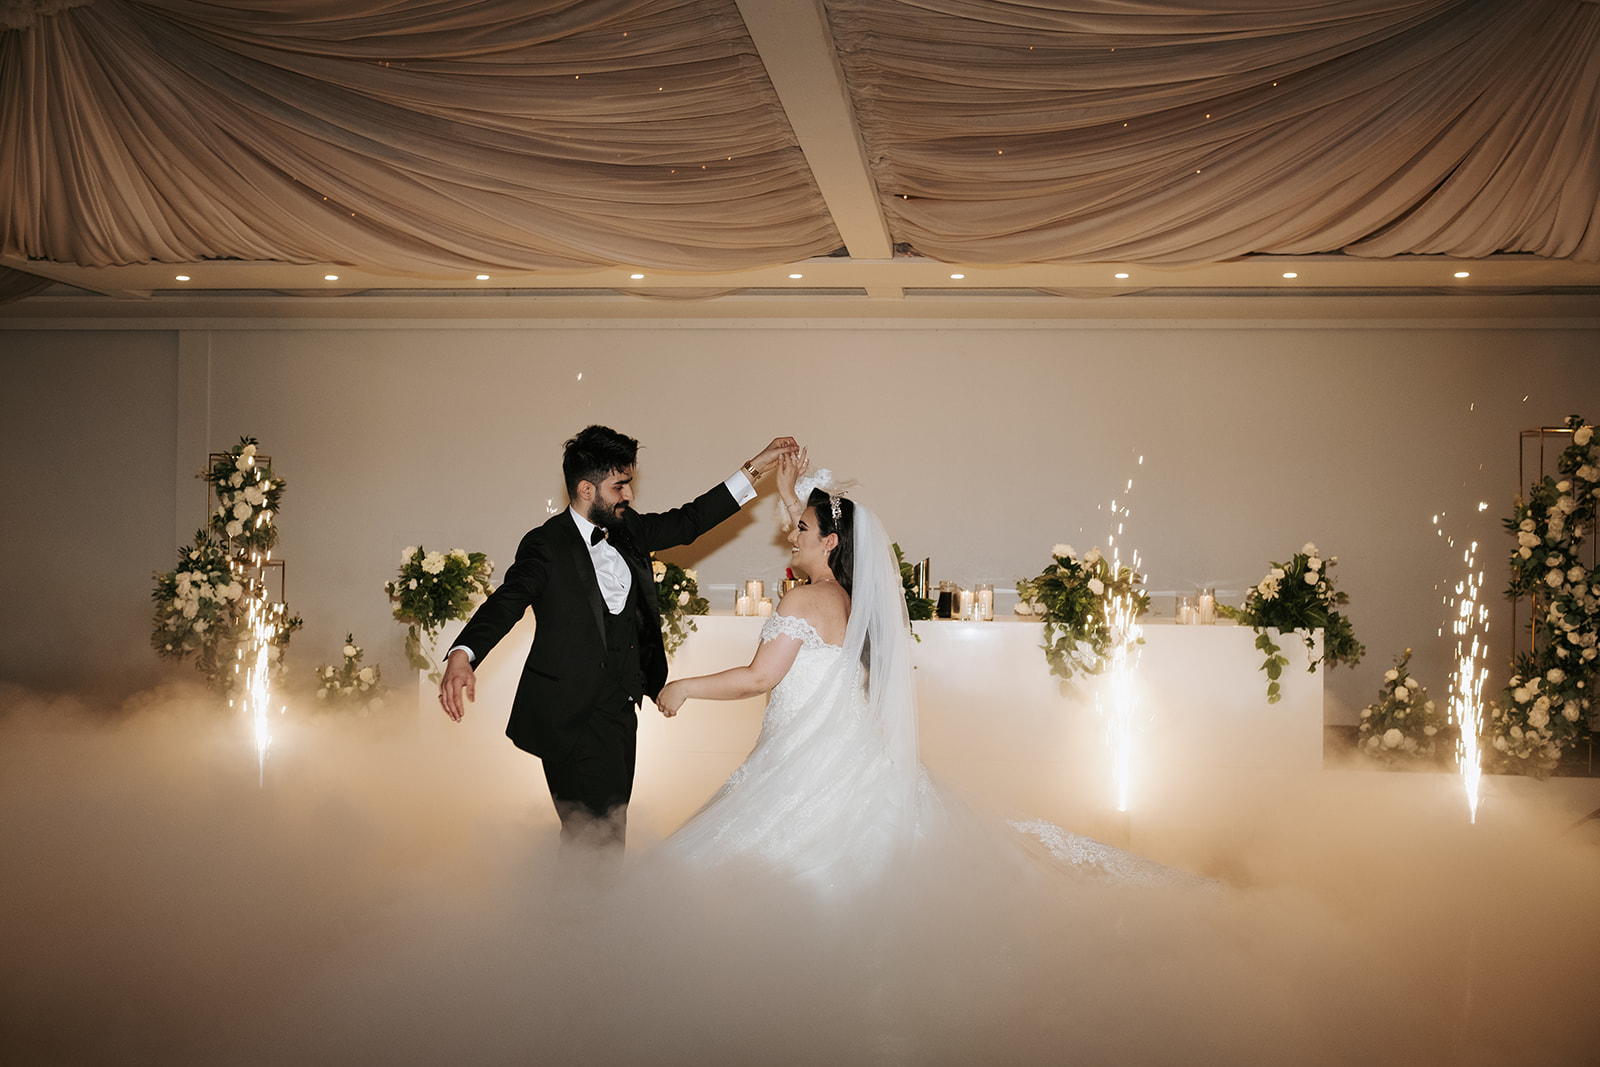 First dance in The Ballroom